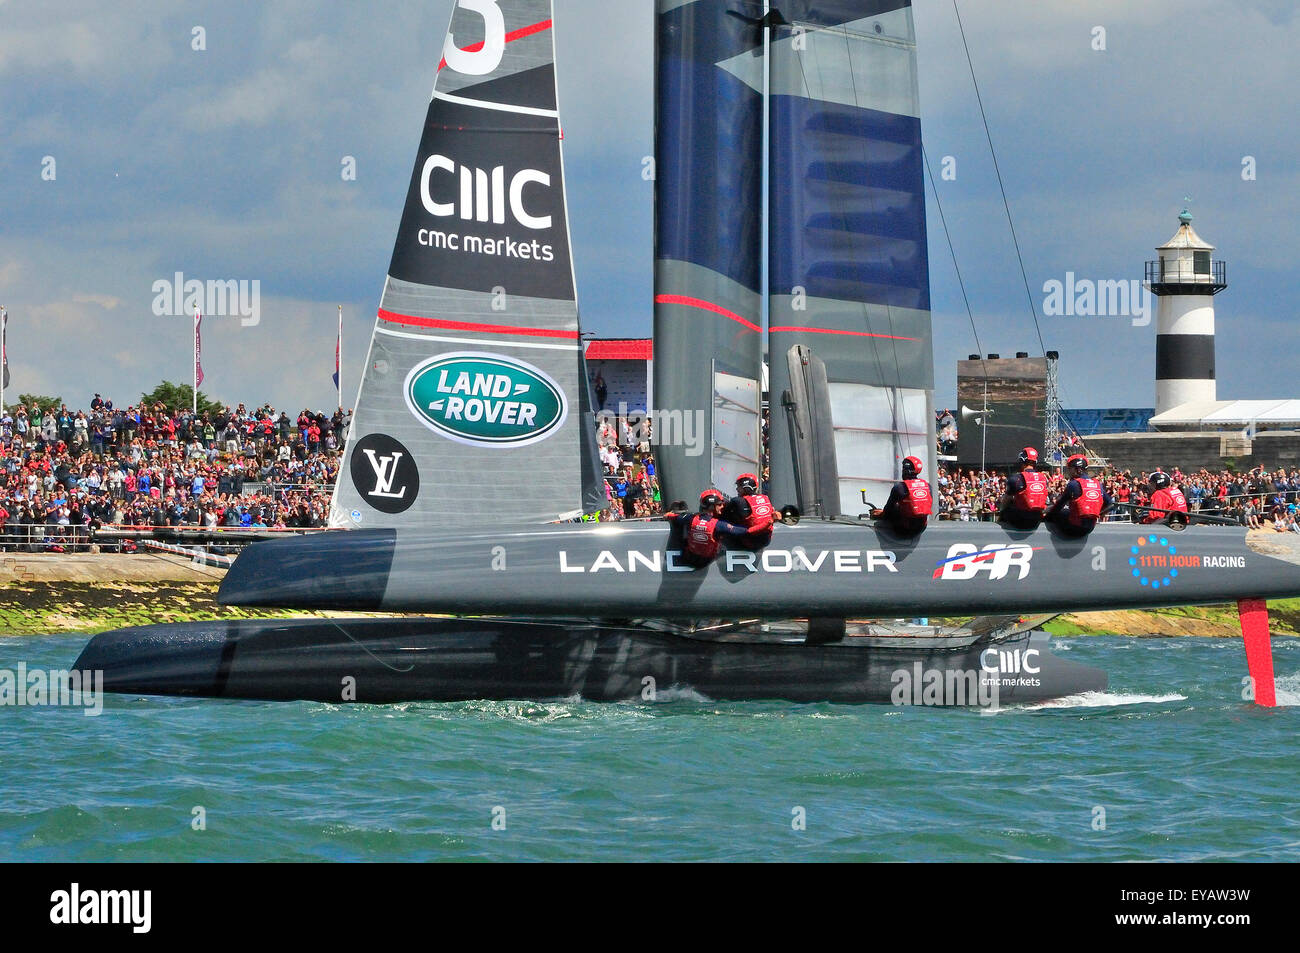 Portsmouth, Hampshire, UK - 25 July 2015 Louis Vuitton America's Cup World Series Portsmouth. Land Rover BAR led by Sir Ben Ainslie, wows the crowd by winning Races 1(of the 2 todays races )in the Louis Vuitton America's Cup World Series Portsmouth. Six teams are competing being Land Rover BAR led by Sir Ben Ainslie, Oracle Team USA, Artemis Racing from Sweden, Emirates Team New Zealand, SoftBank Team Japan, and Groupama Team France all sailing the 'flying' AC45f. Credit:  Gary Blake /Alamy Live News Stock Photo